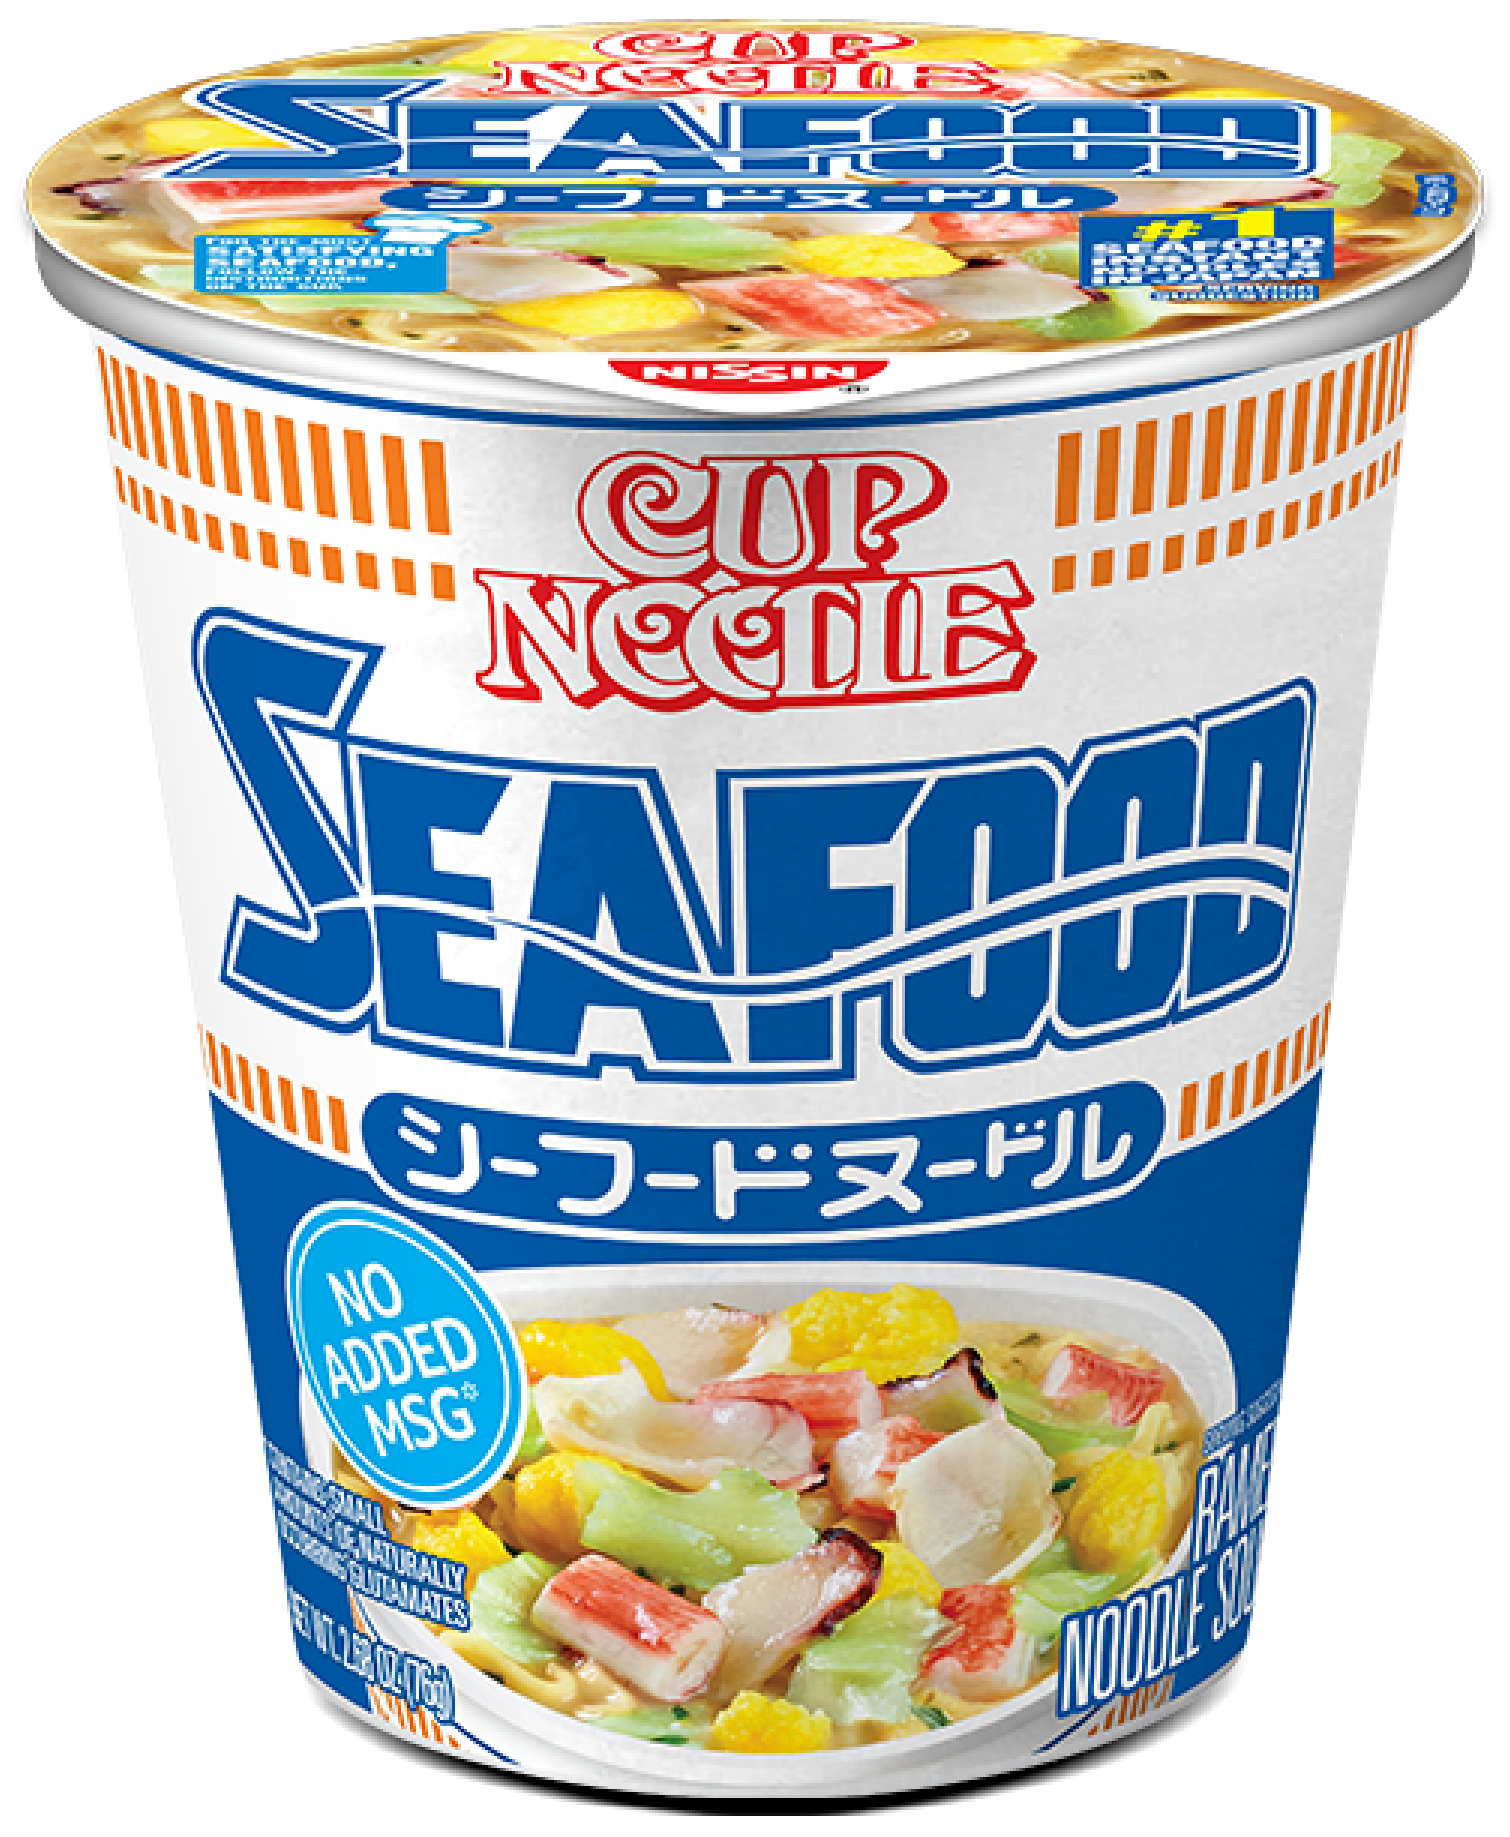 WHERE TO BUY - Nissin Food